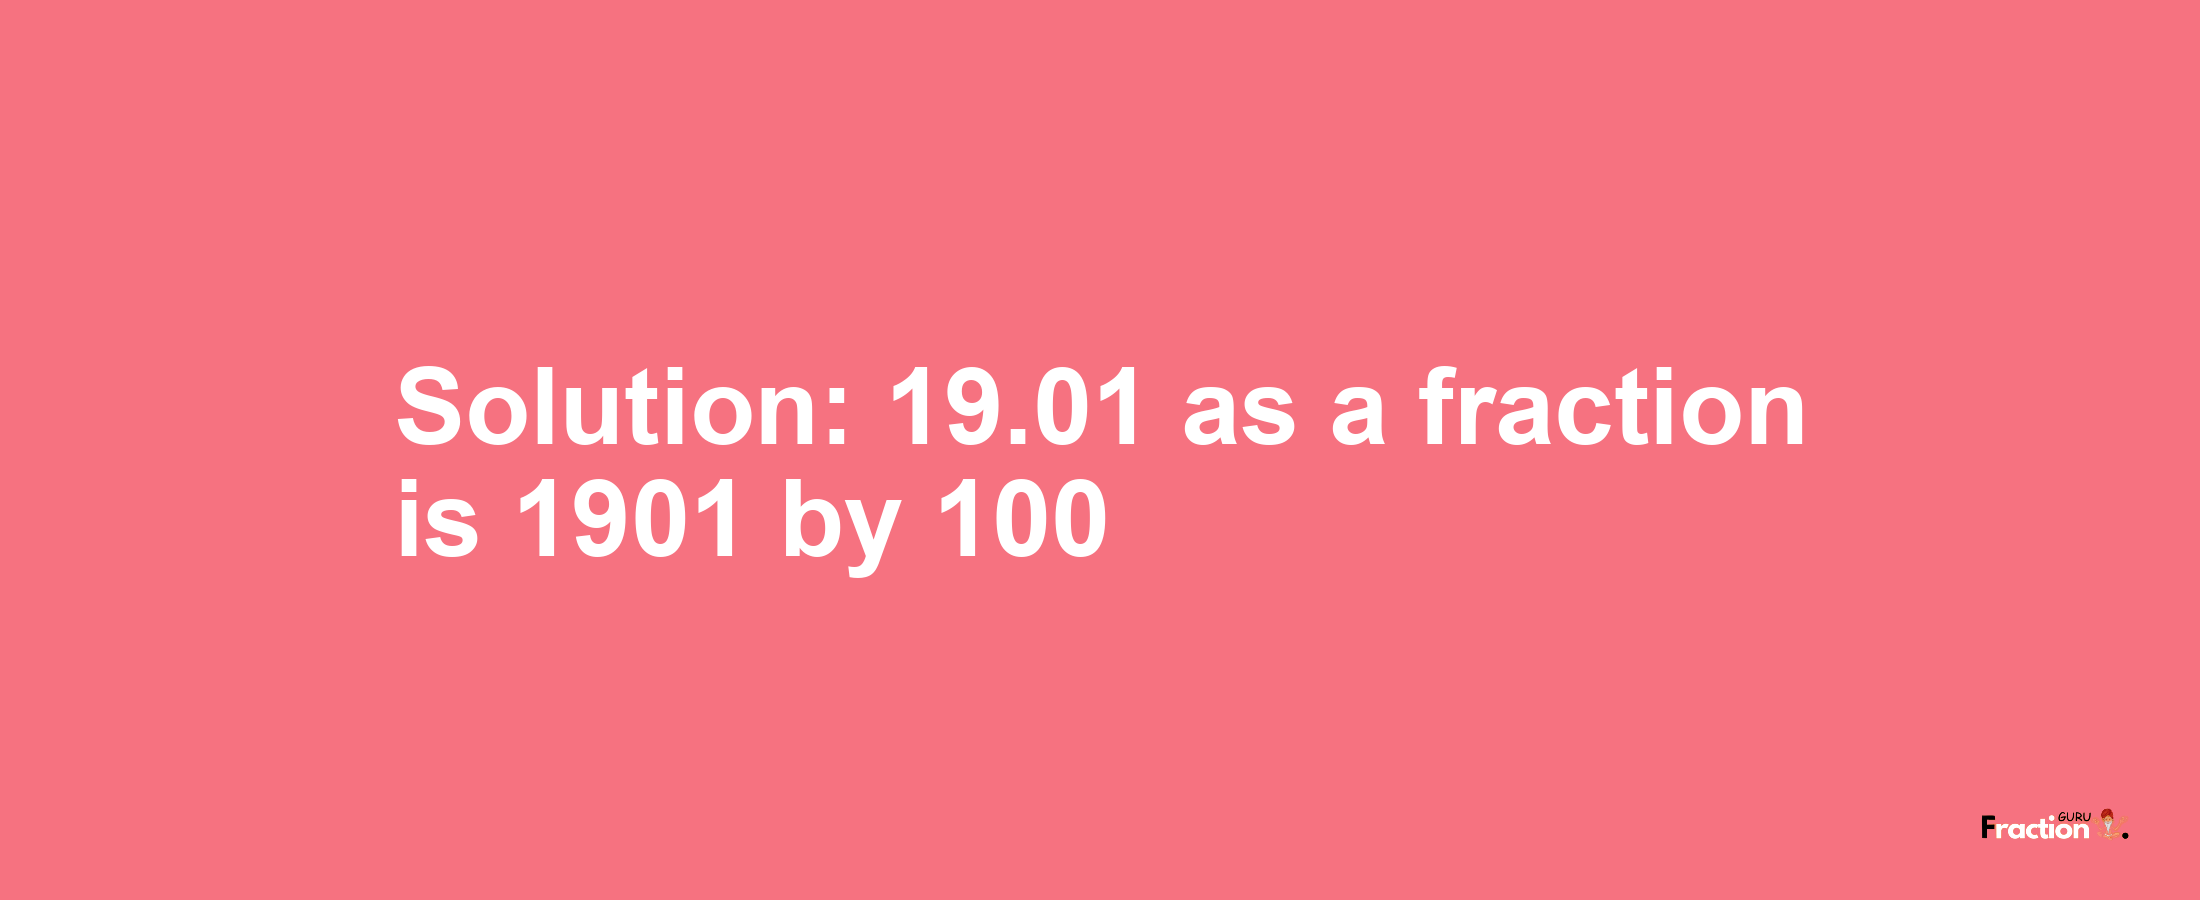 Solution:19.01 as a fraction is 1901/100